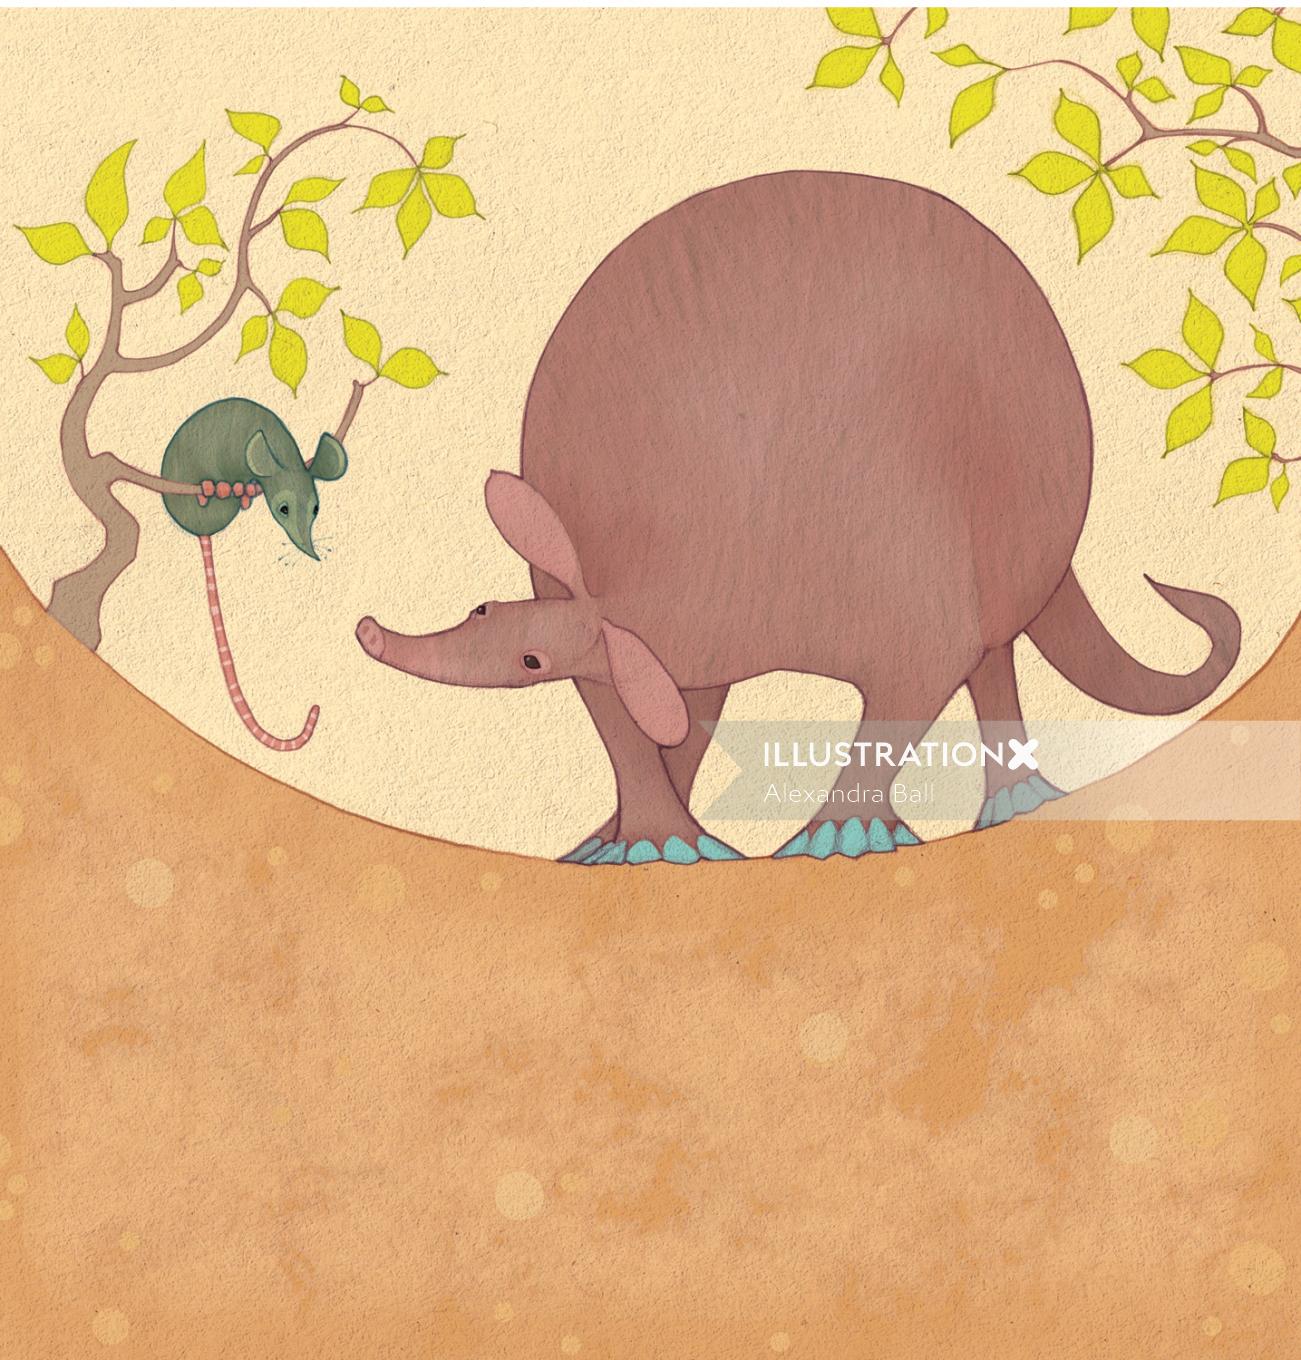 Drawing of mouse and elephant